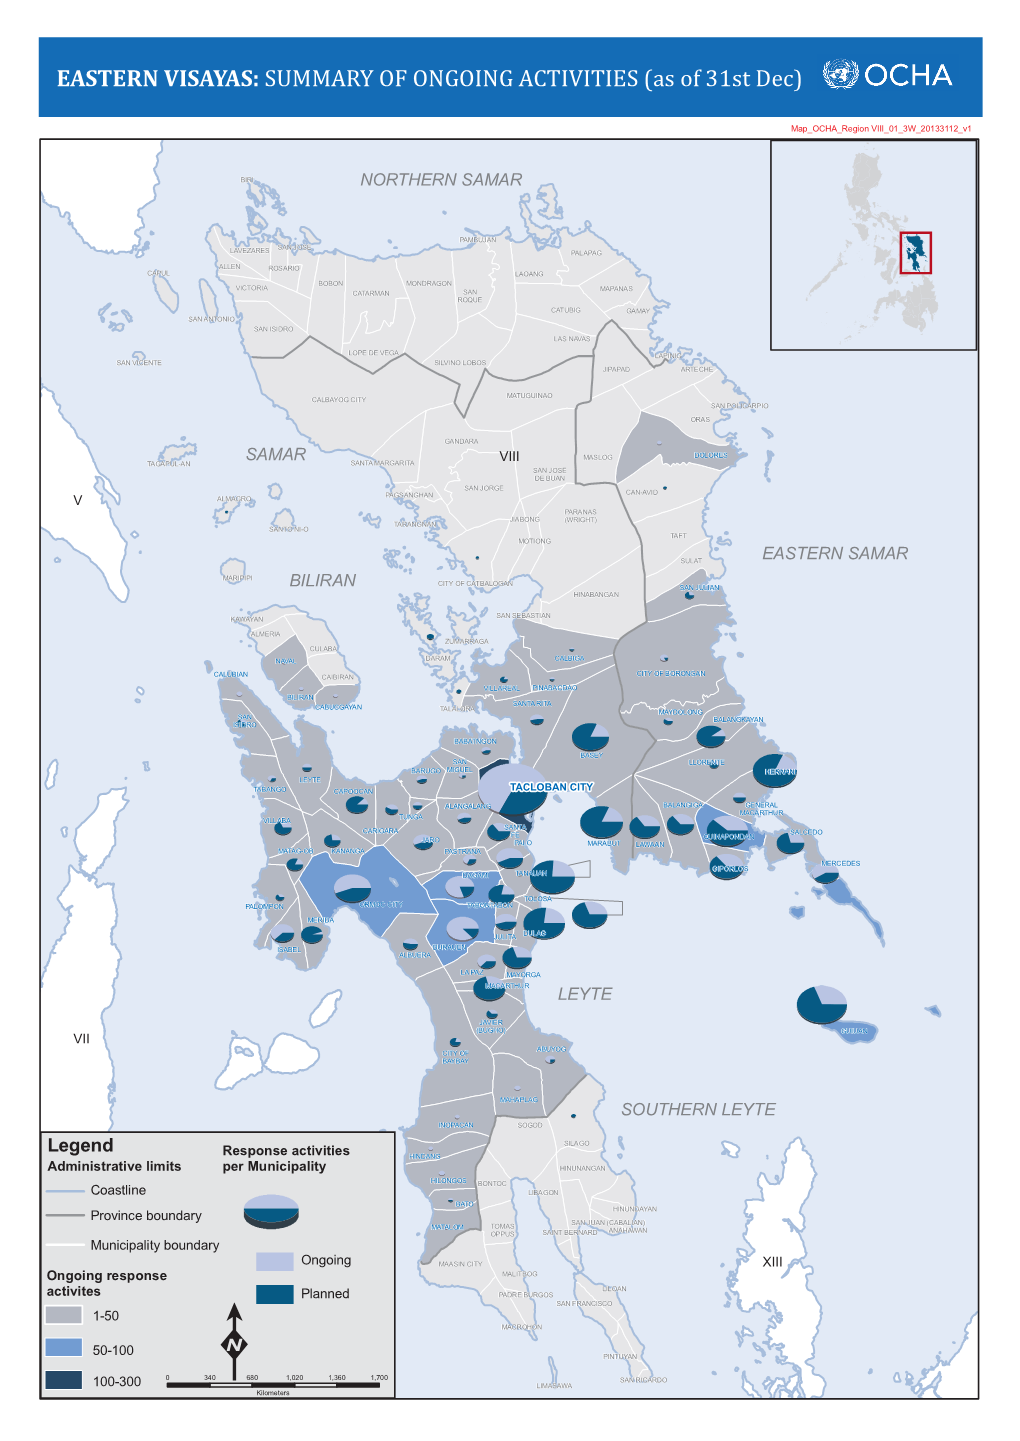 EASTERN VISAYAS: SUMMARY of ONGOING ACTIVITIES (As of 31St Dec)